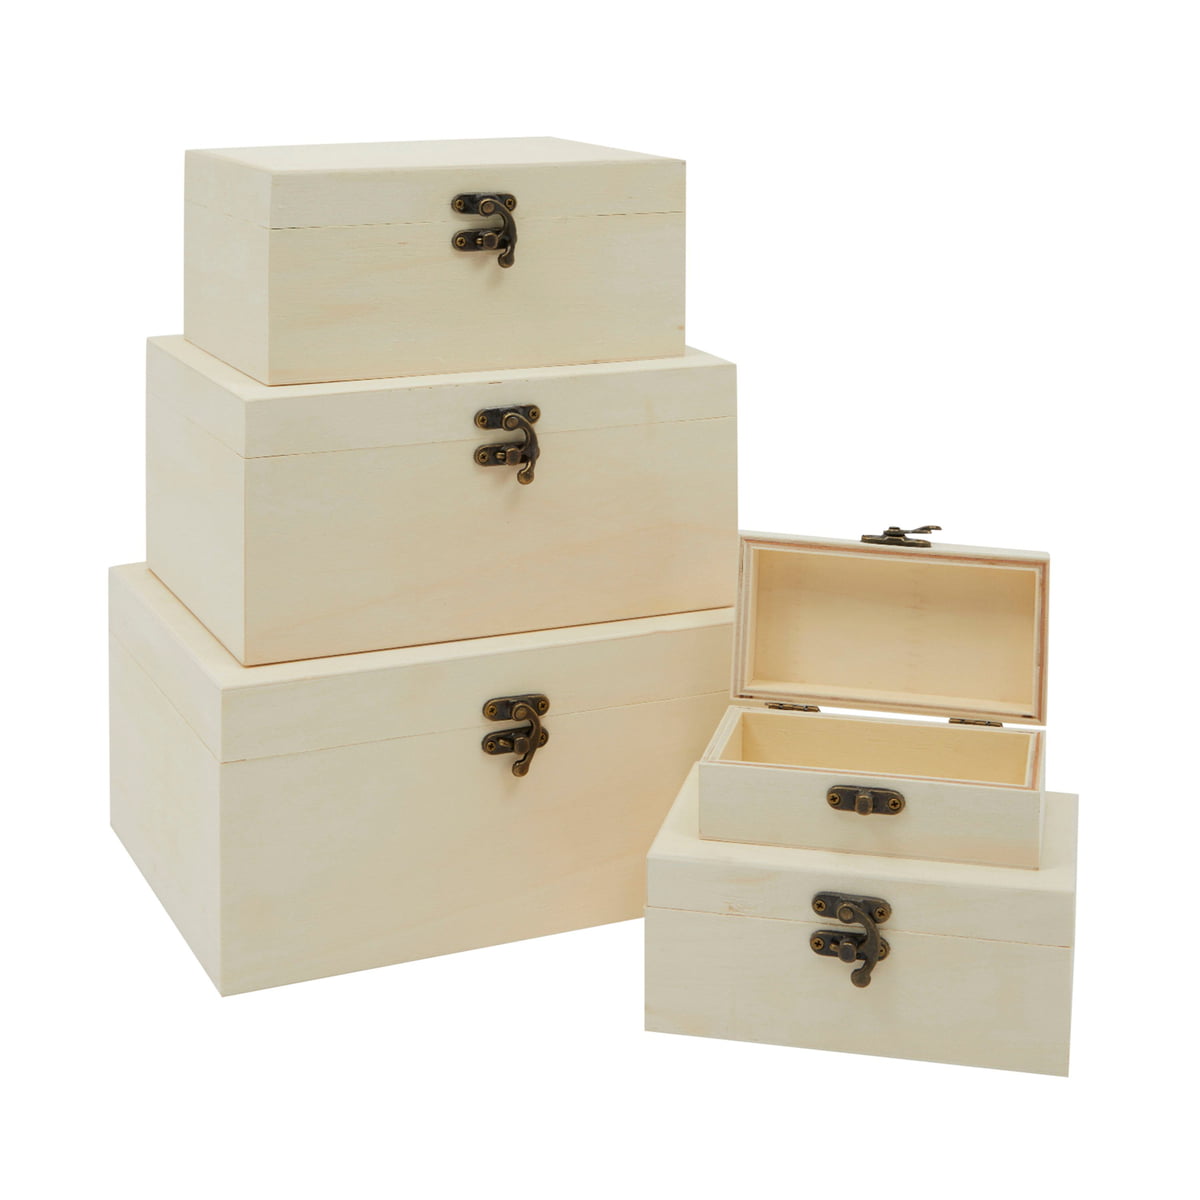 Wooden Box Storage With Lid Hinges and Locks Boxes Home Decor Wood Chest 